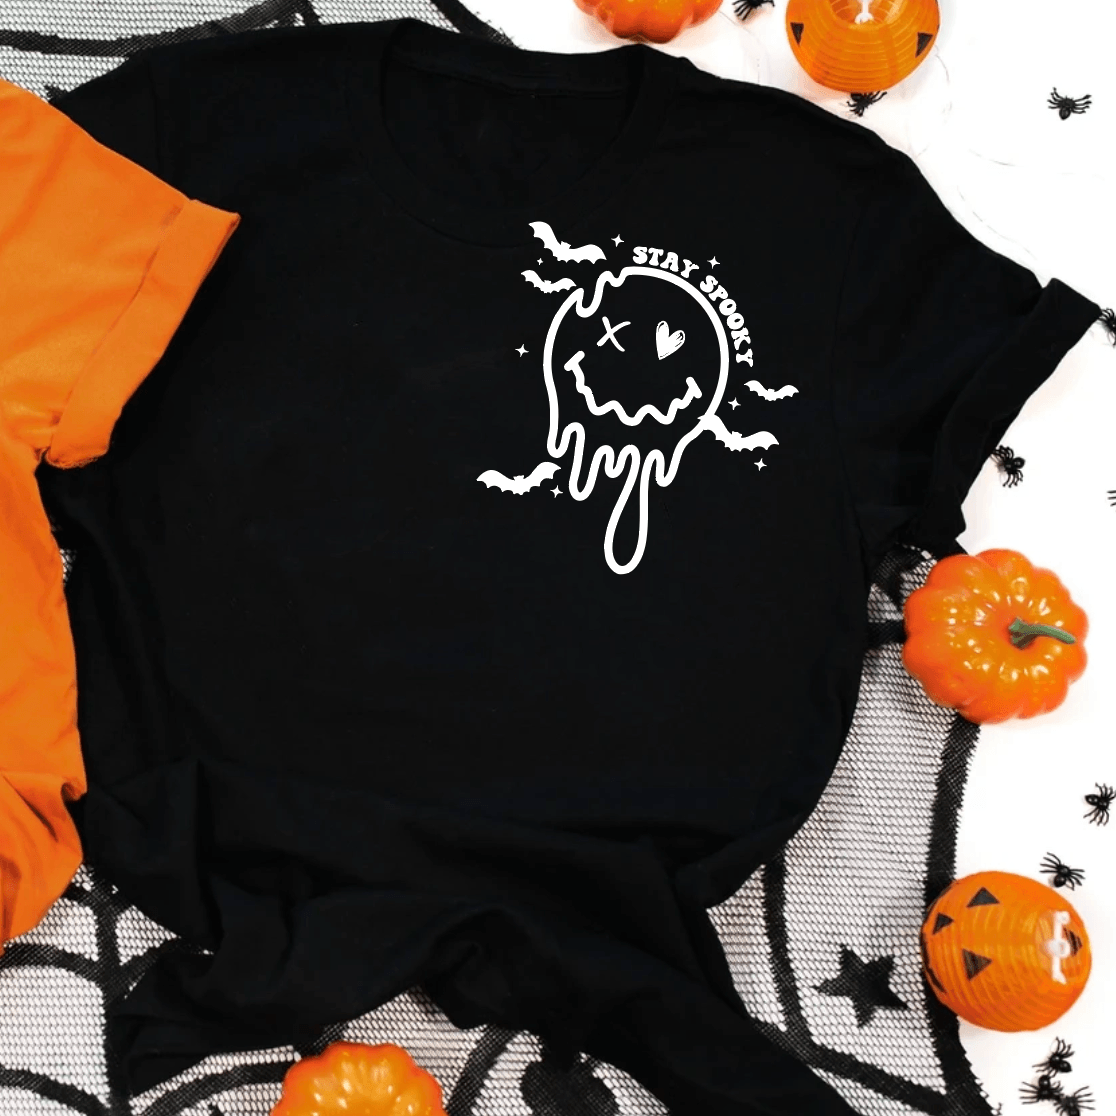 Stay Spooky(Black pocket tee) - Signastyle Boutique